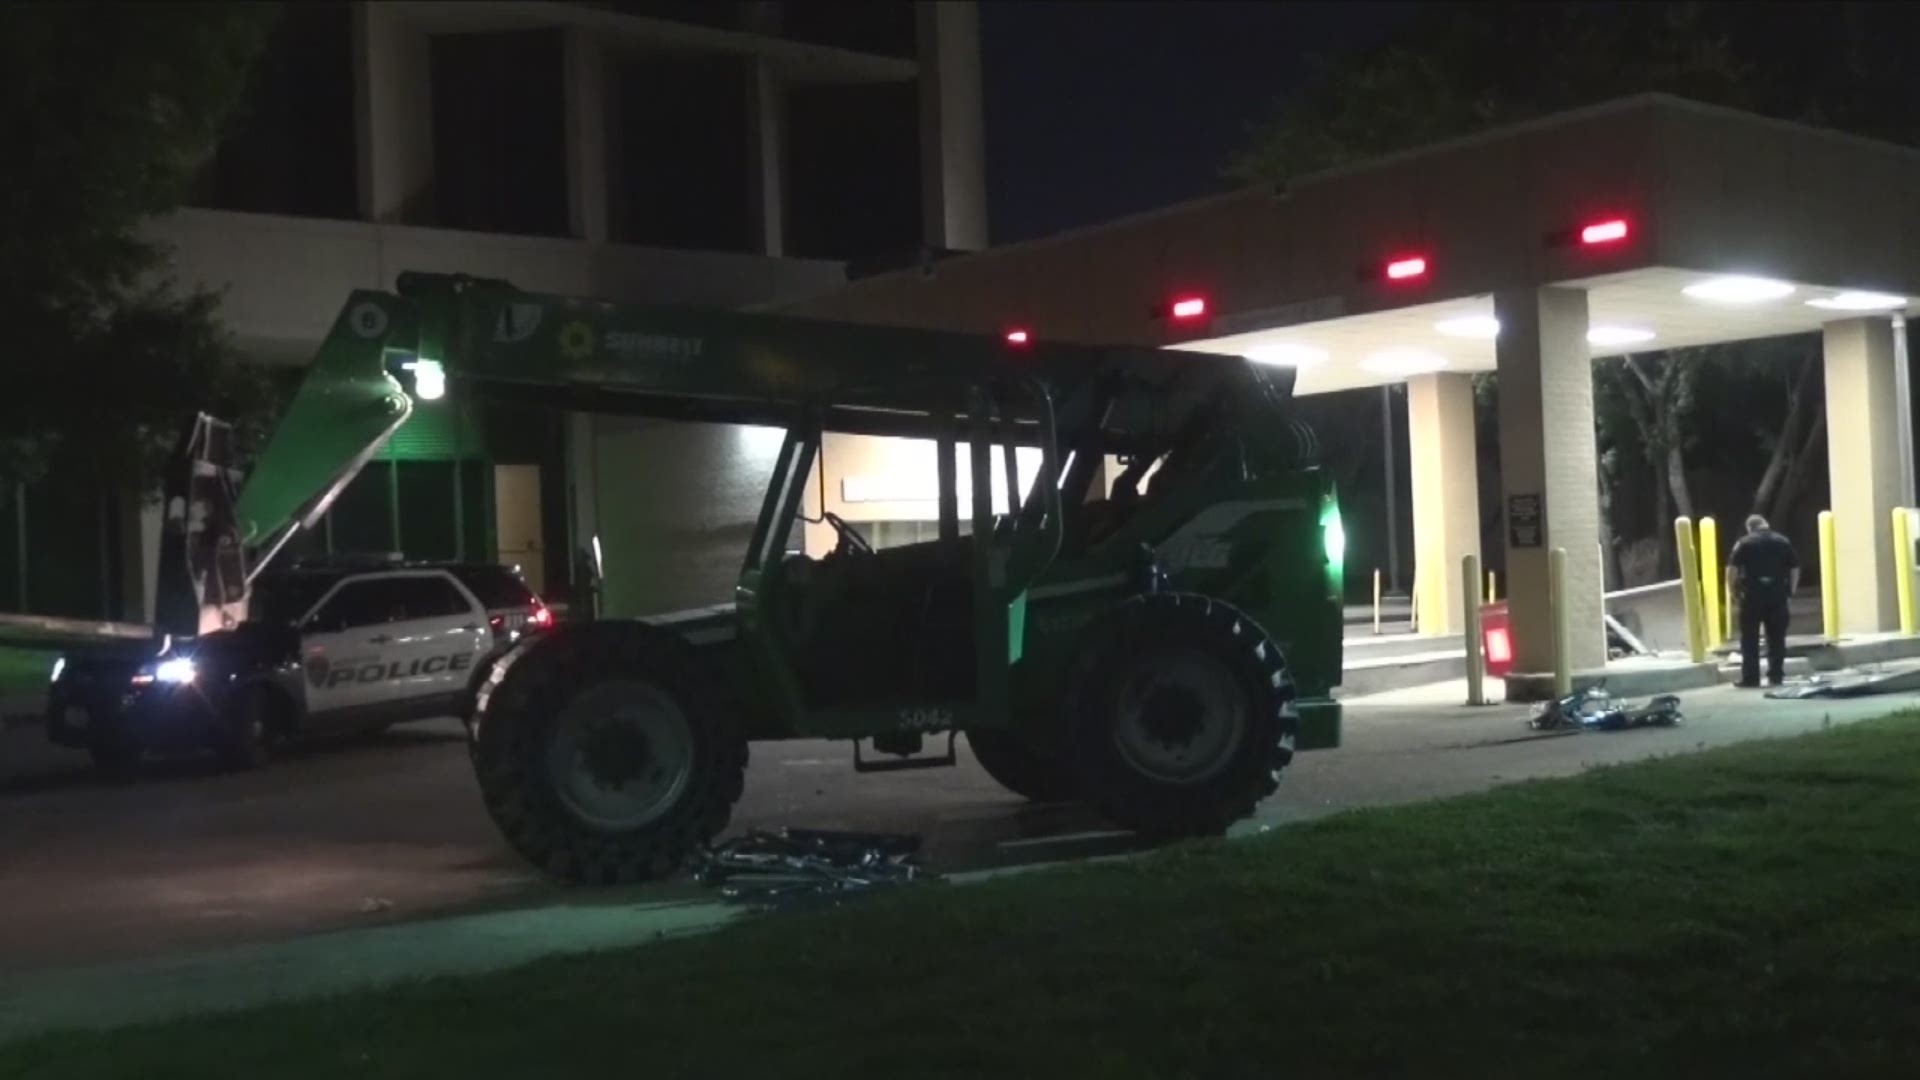 Hpd Thieves Use Forklift In Smash And Grab At Drive Thru Atm Kare11 Com